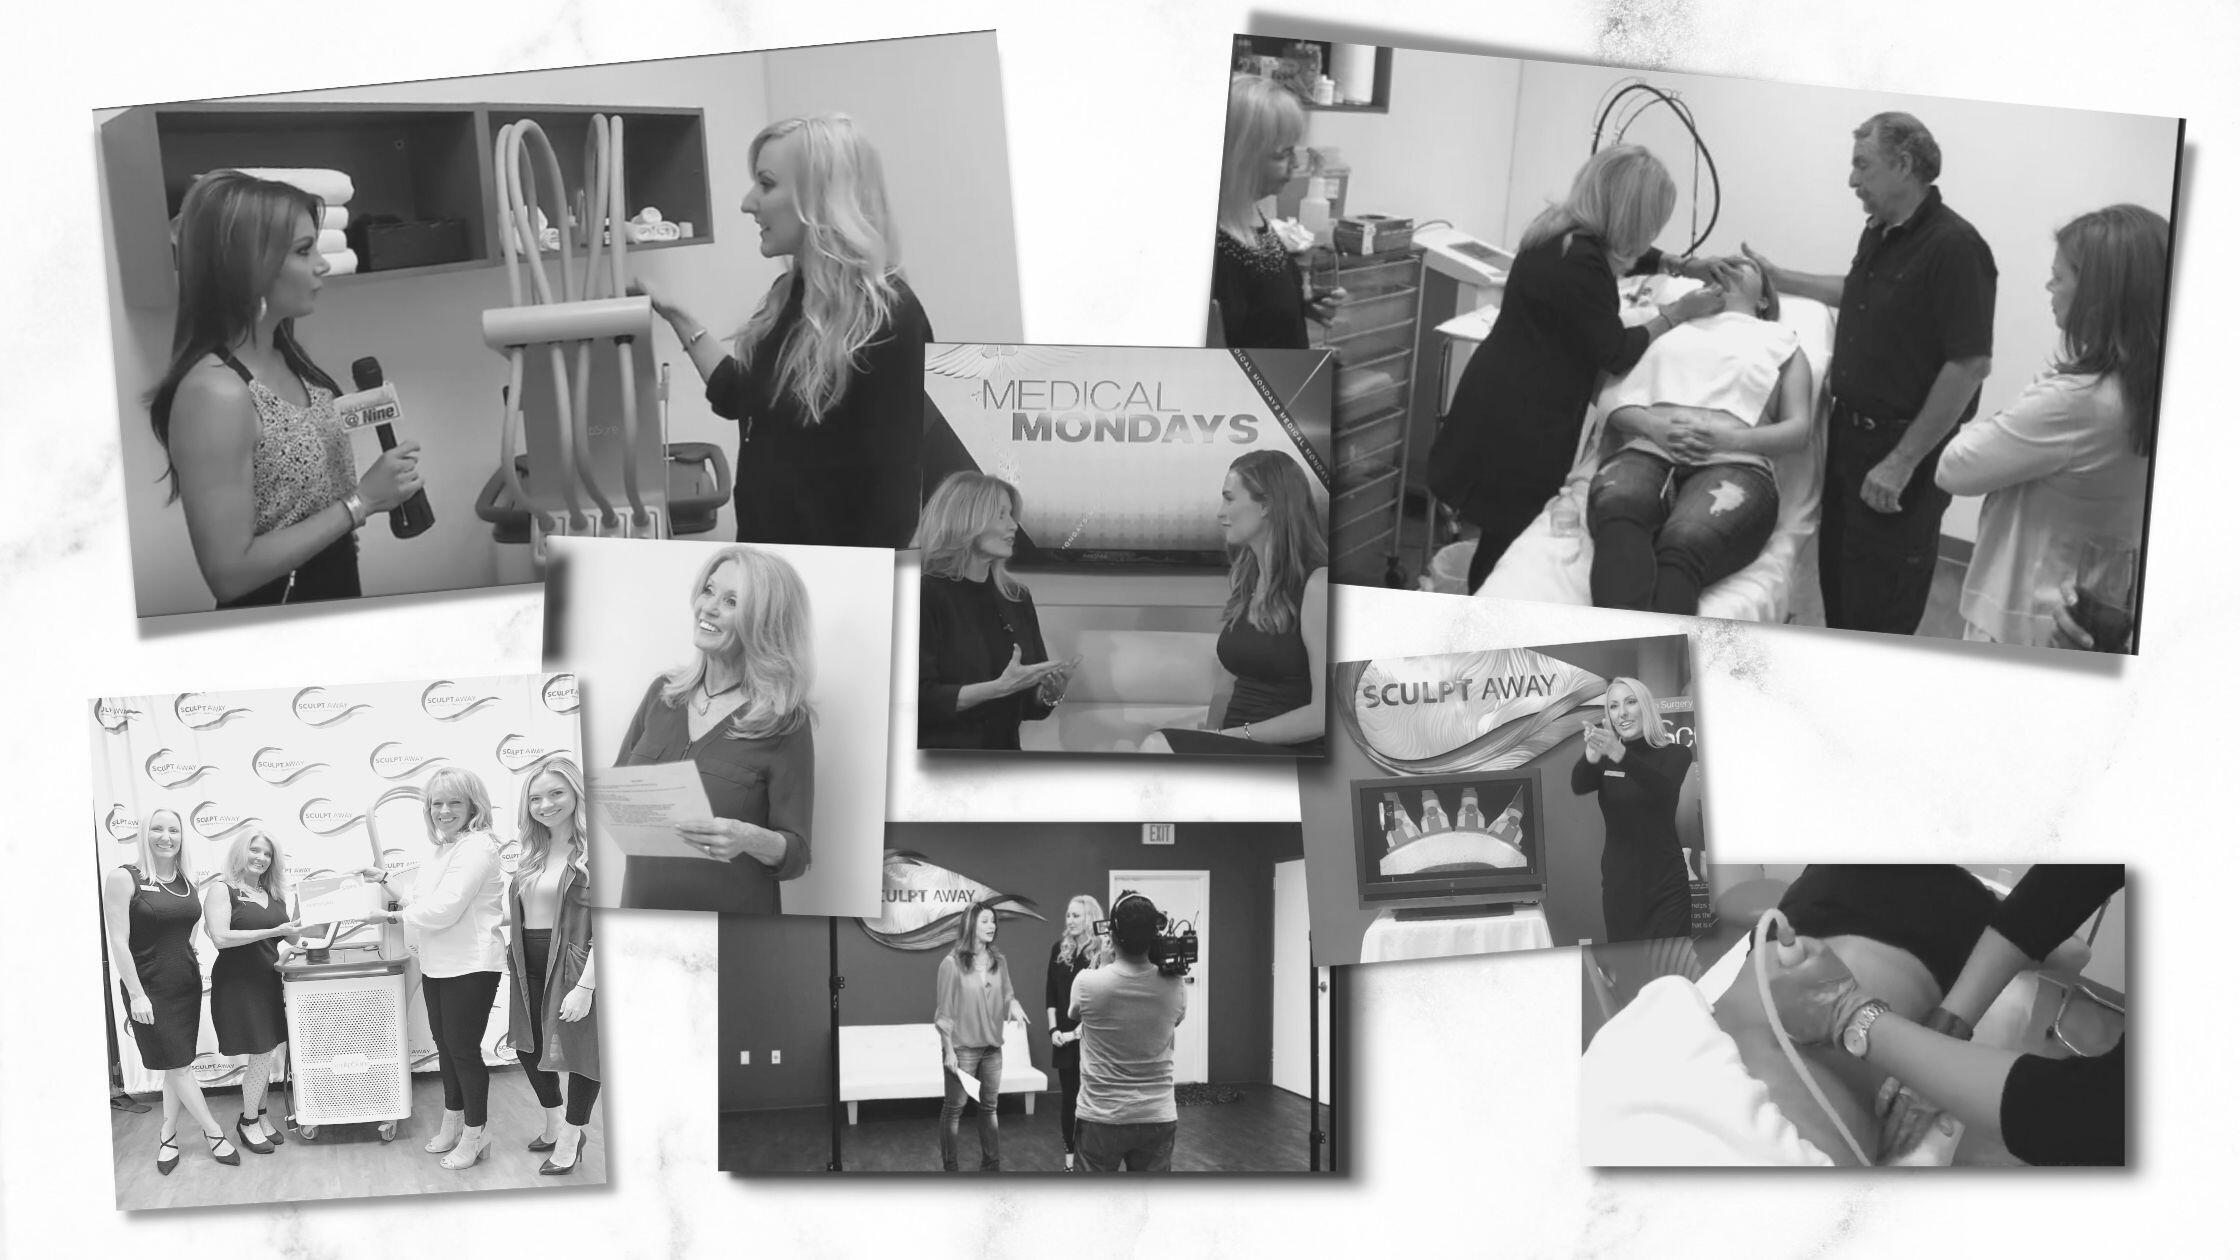 founders of the body contouring academy collage showing founder through the years